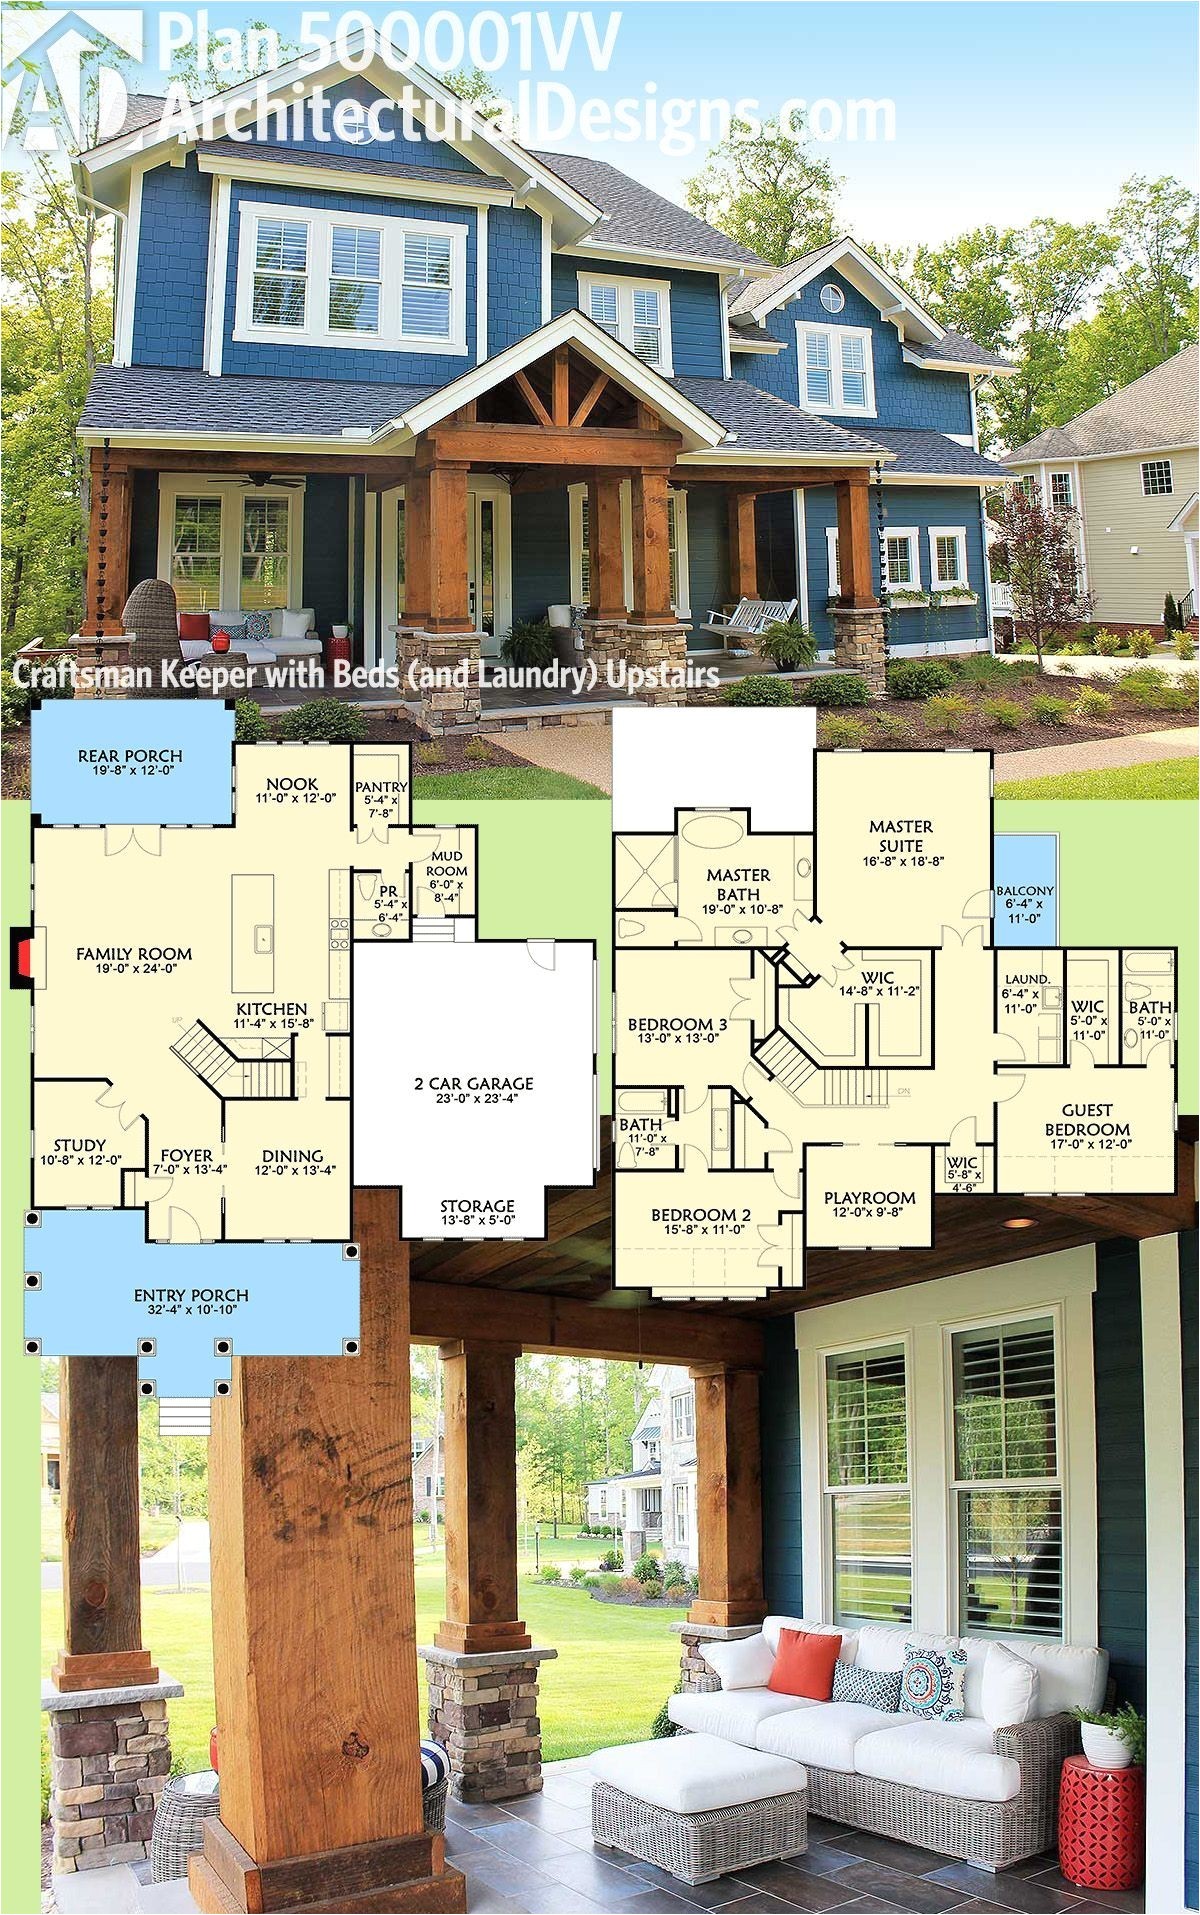 buy house plans awesome 10 best pics new home plans with